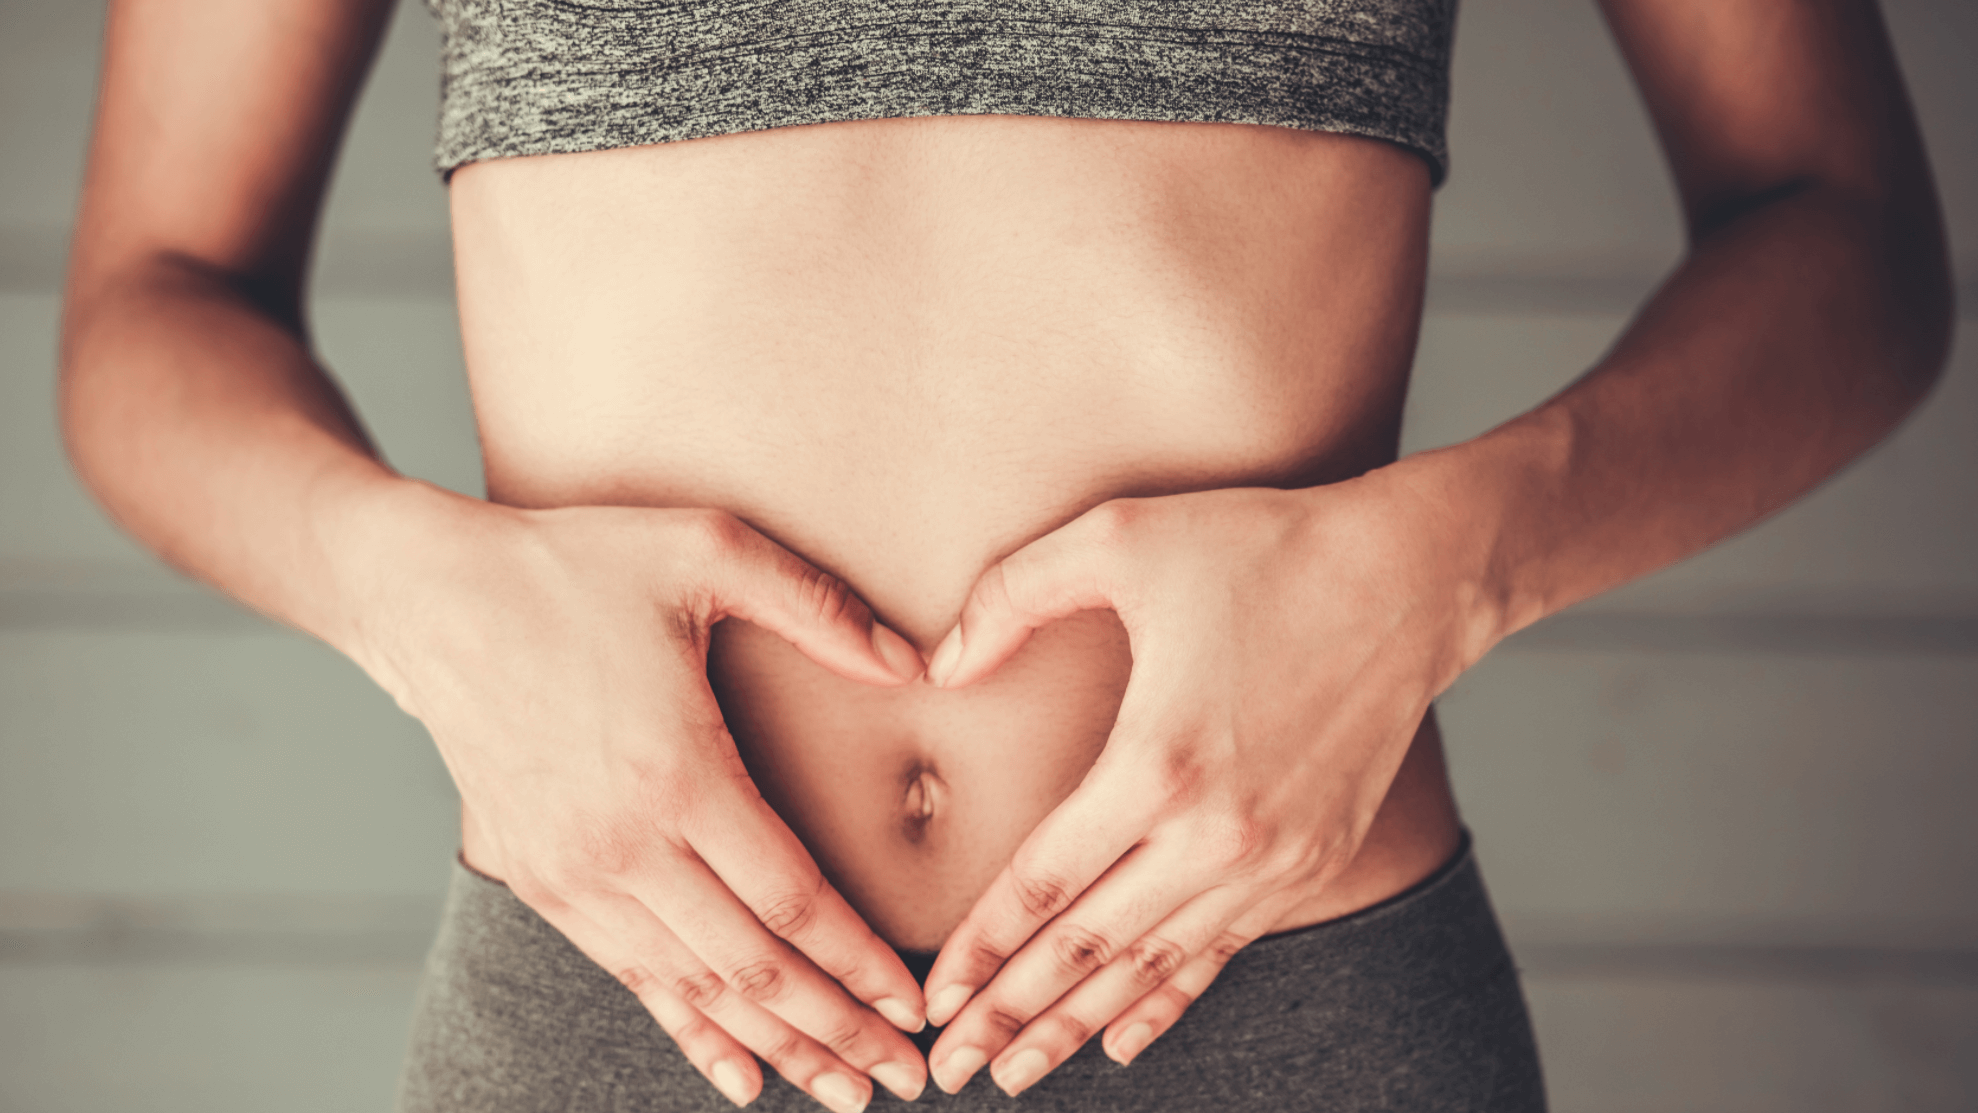 Why Women Get Tummy Tucks After Having a Baby